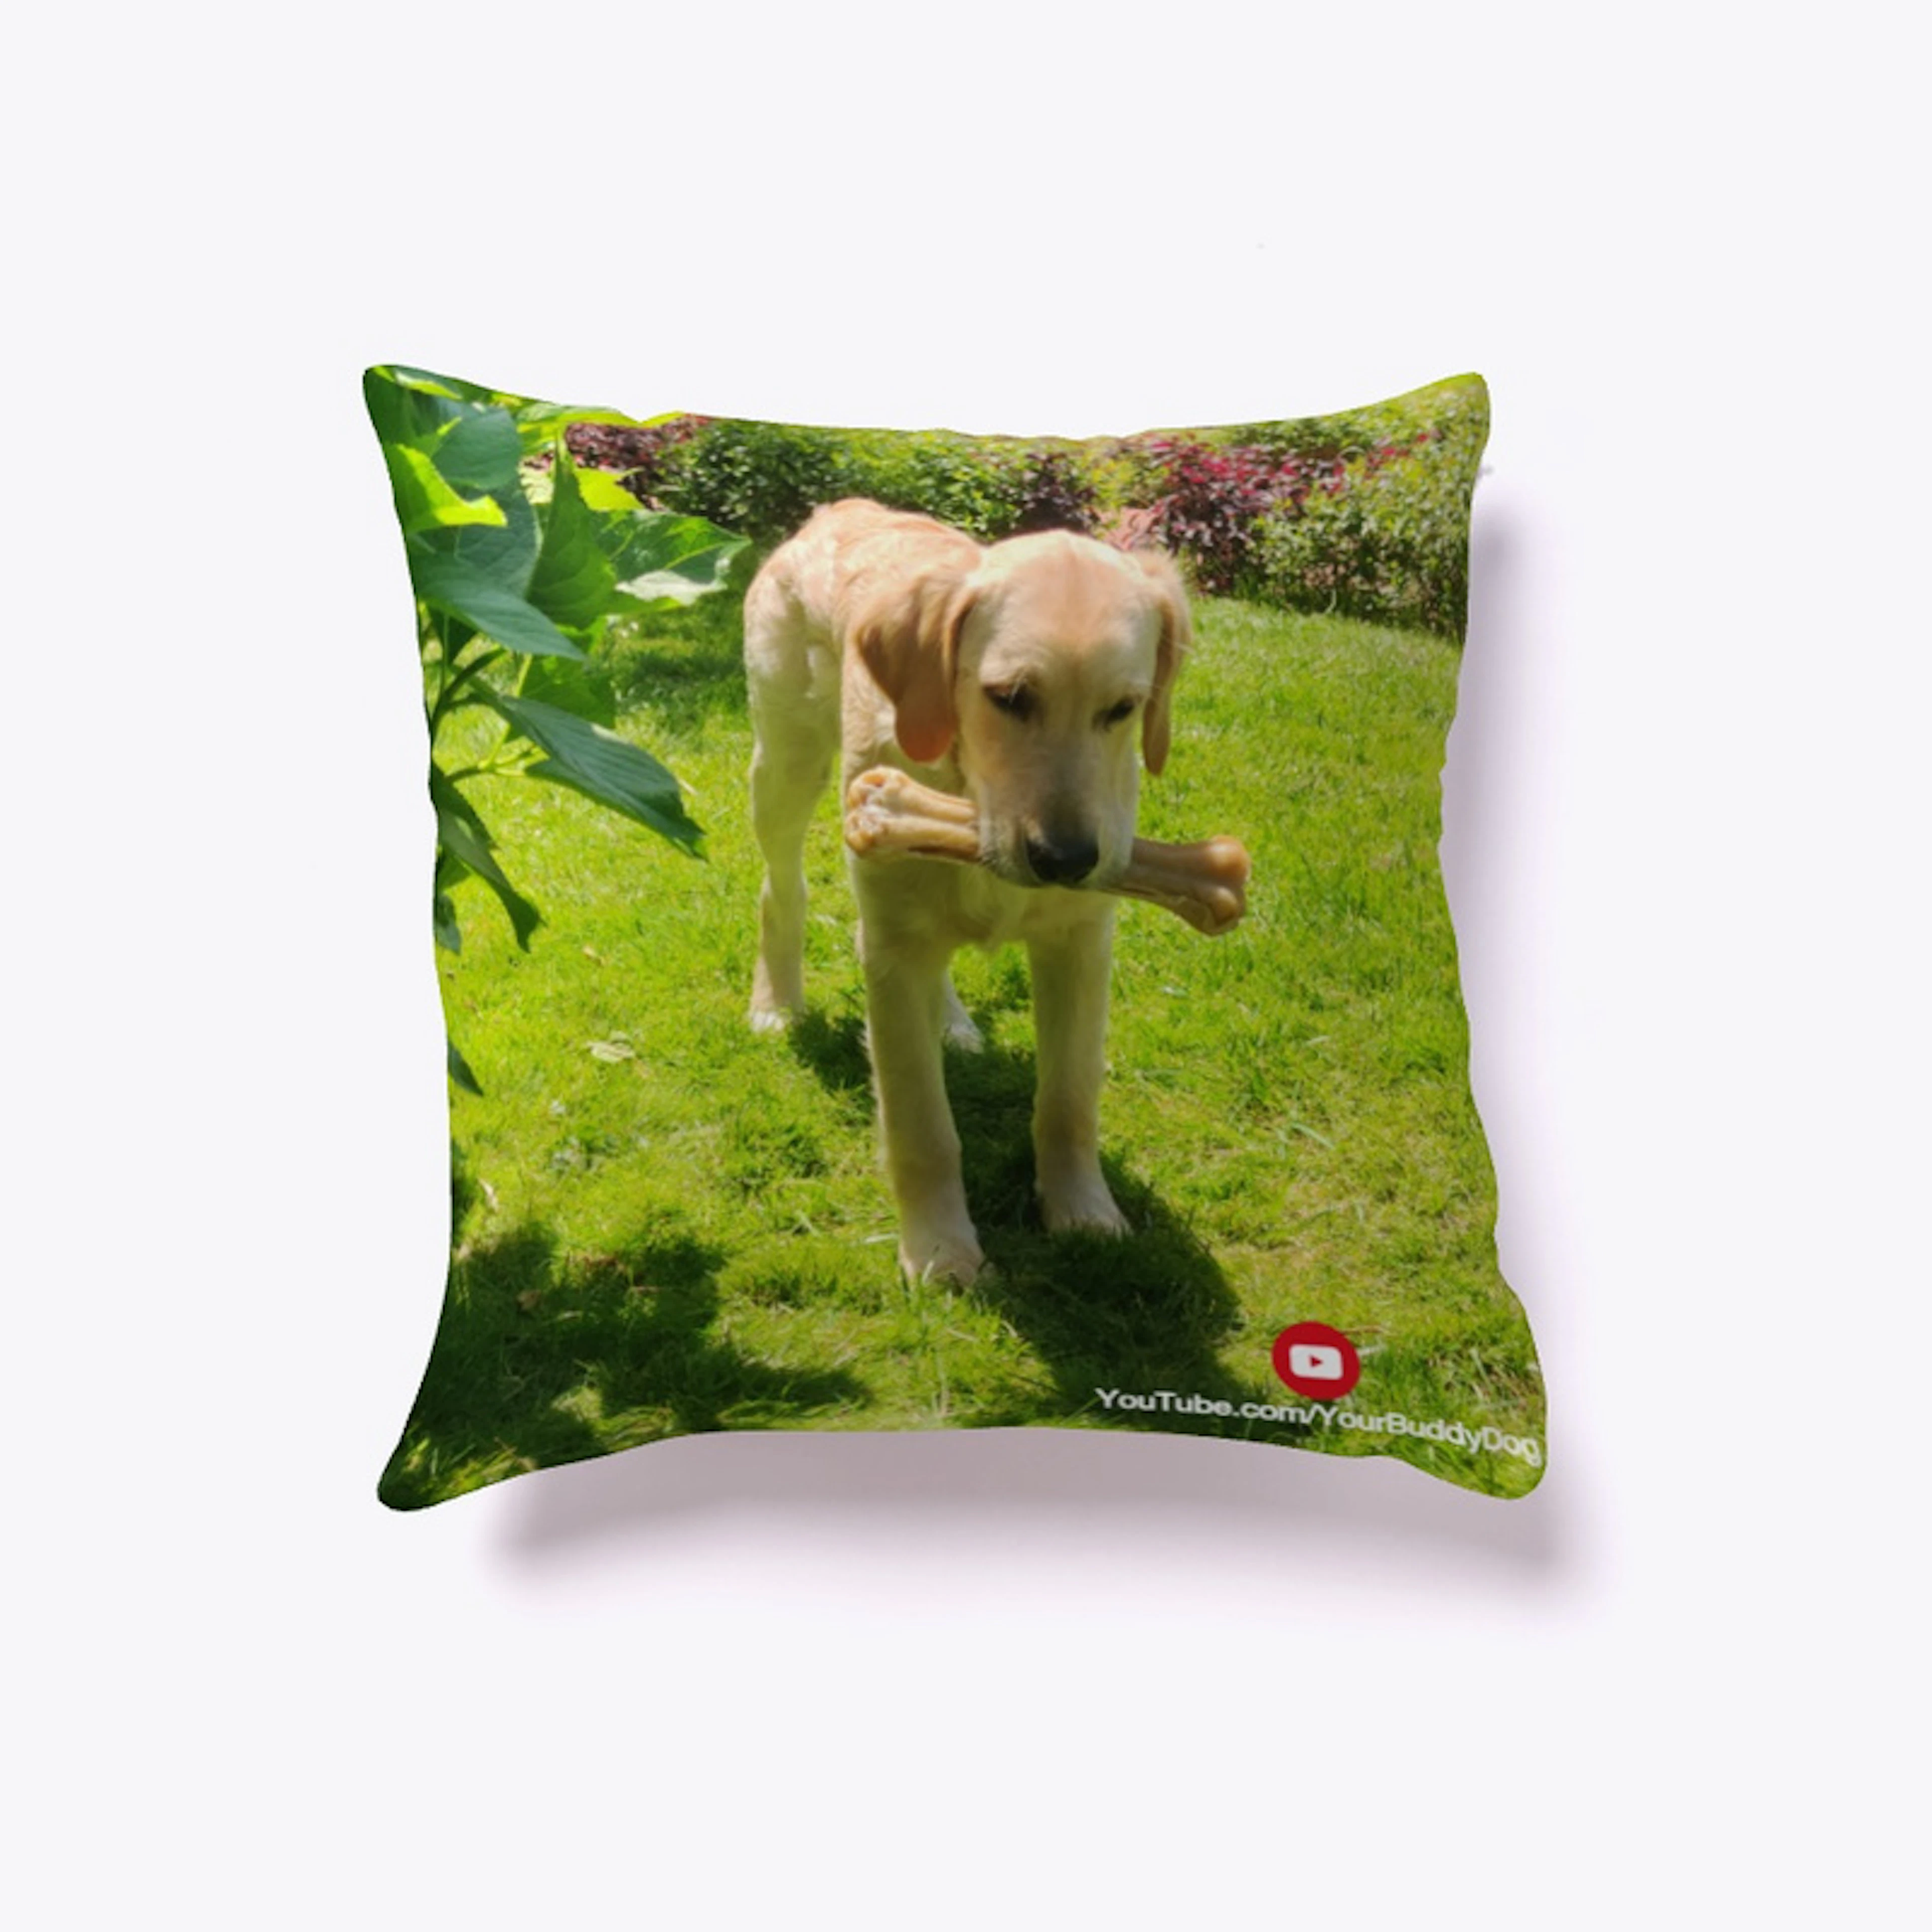 Your Buddy Dog Pillow